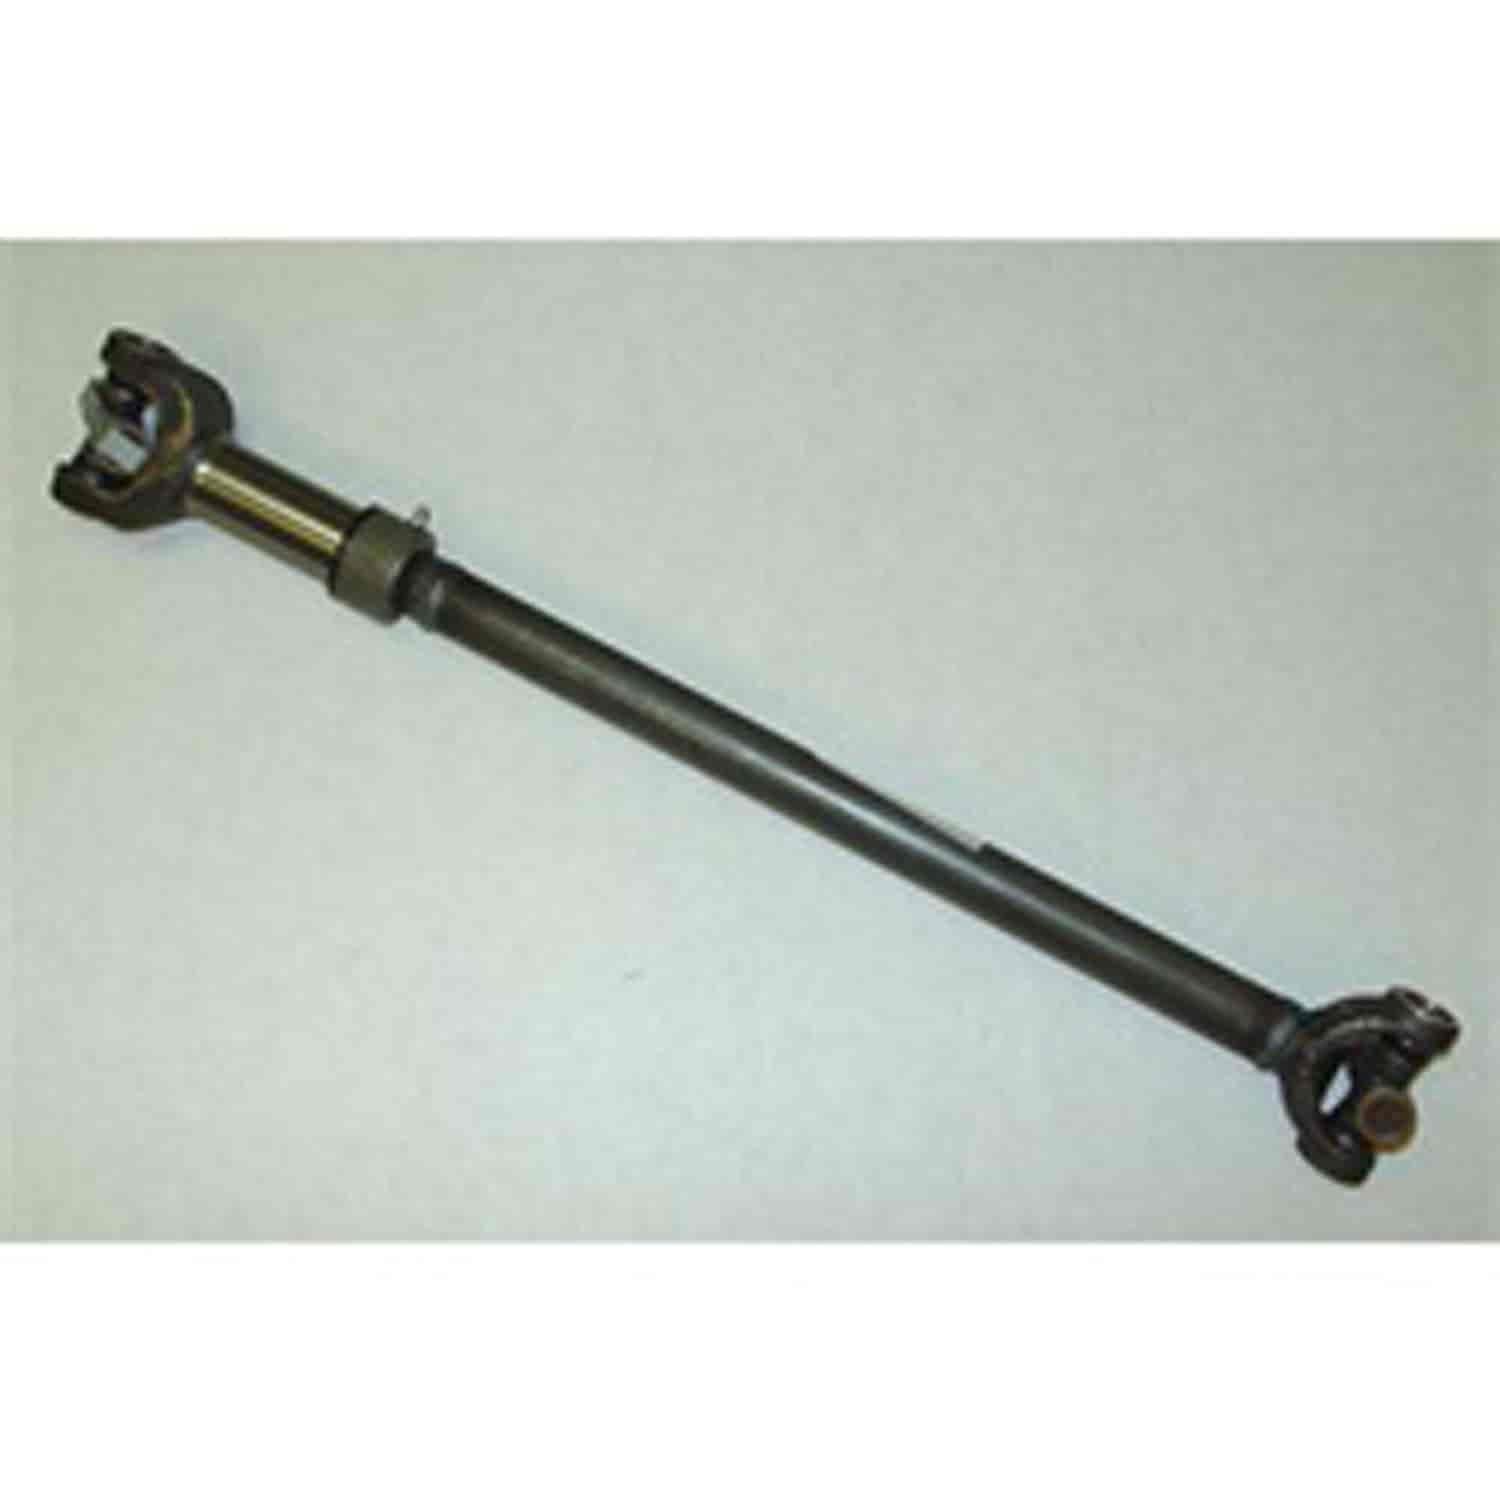 Stock replacement front driveshaft from Omix-ADA, Fits 82-86 Jeep CJ5 and CJ7 with 4-cylinde